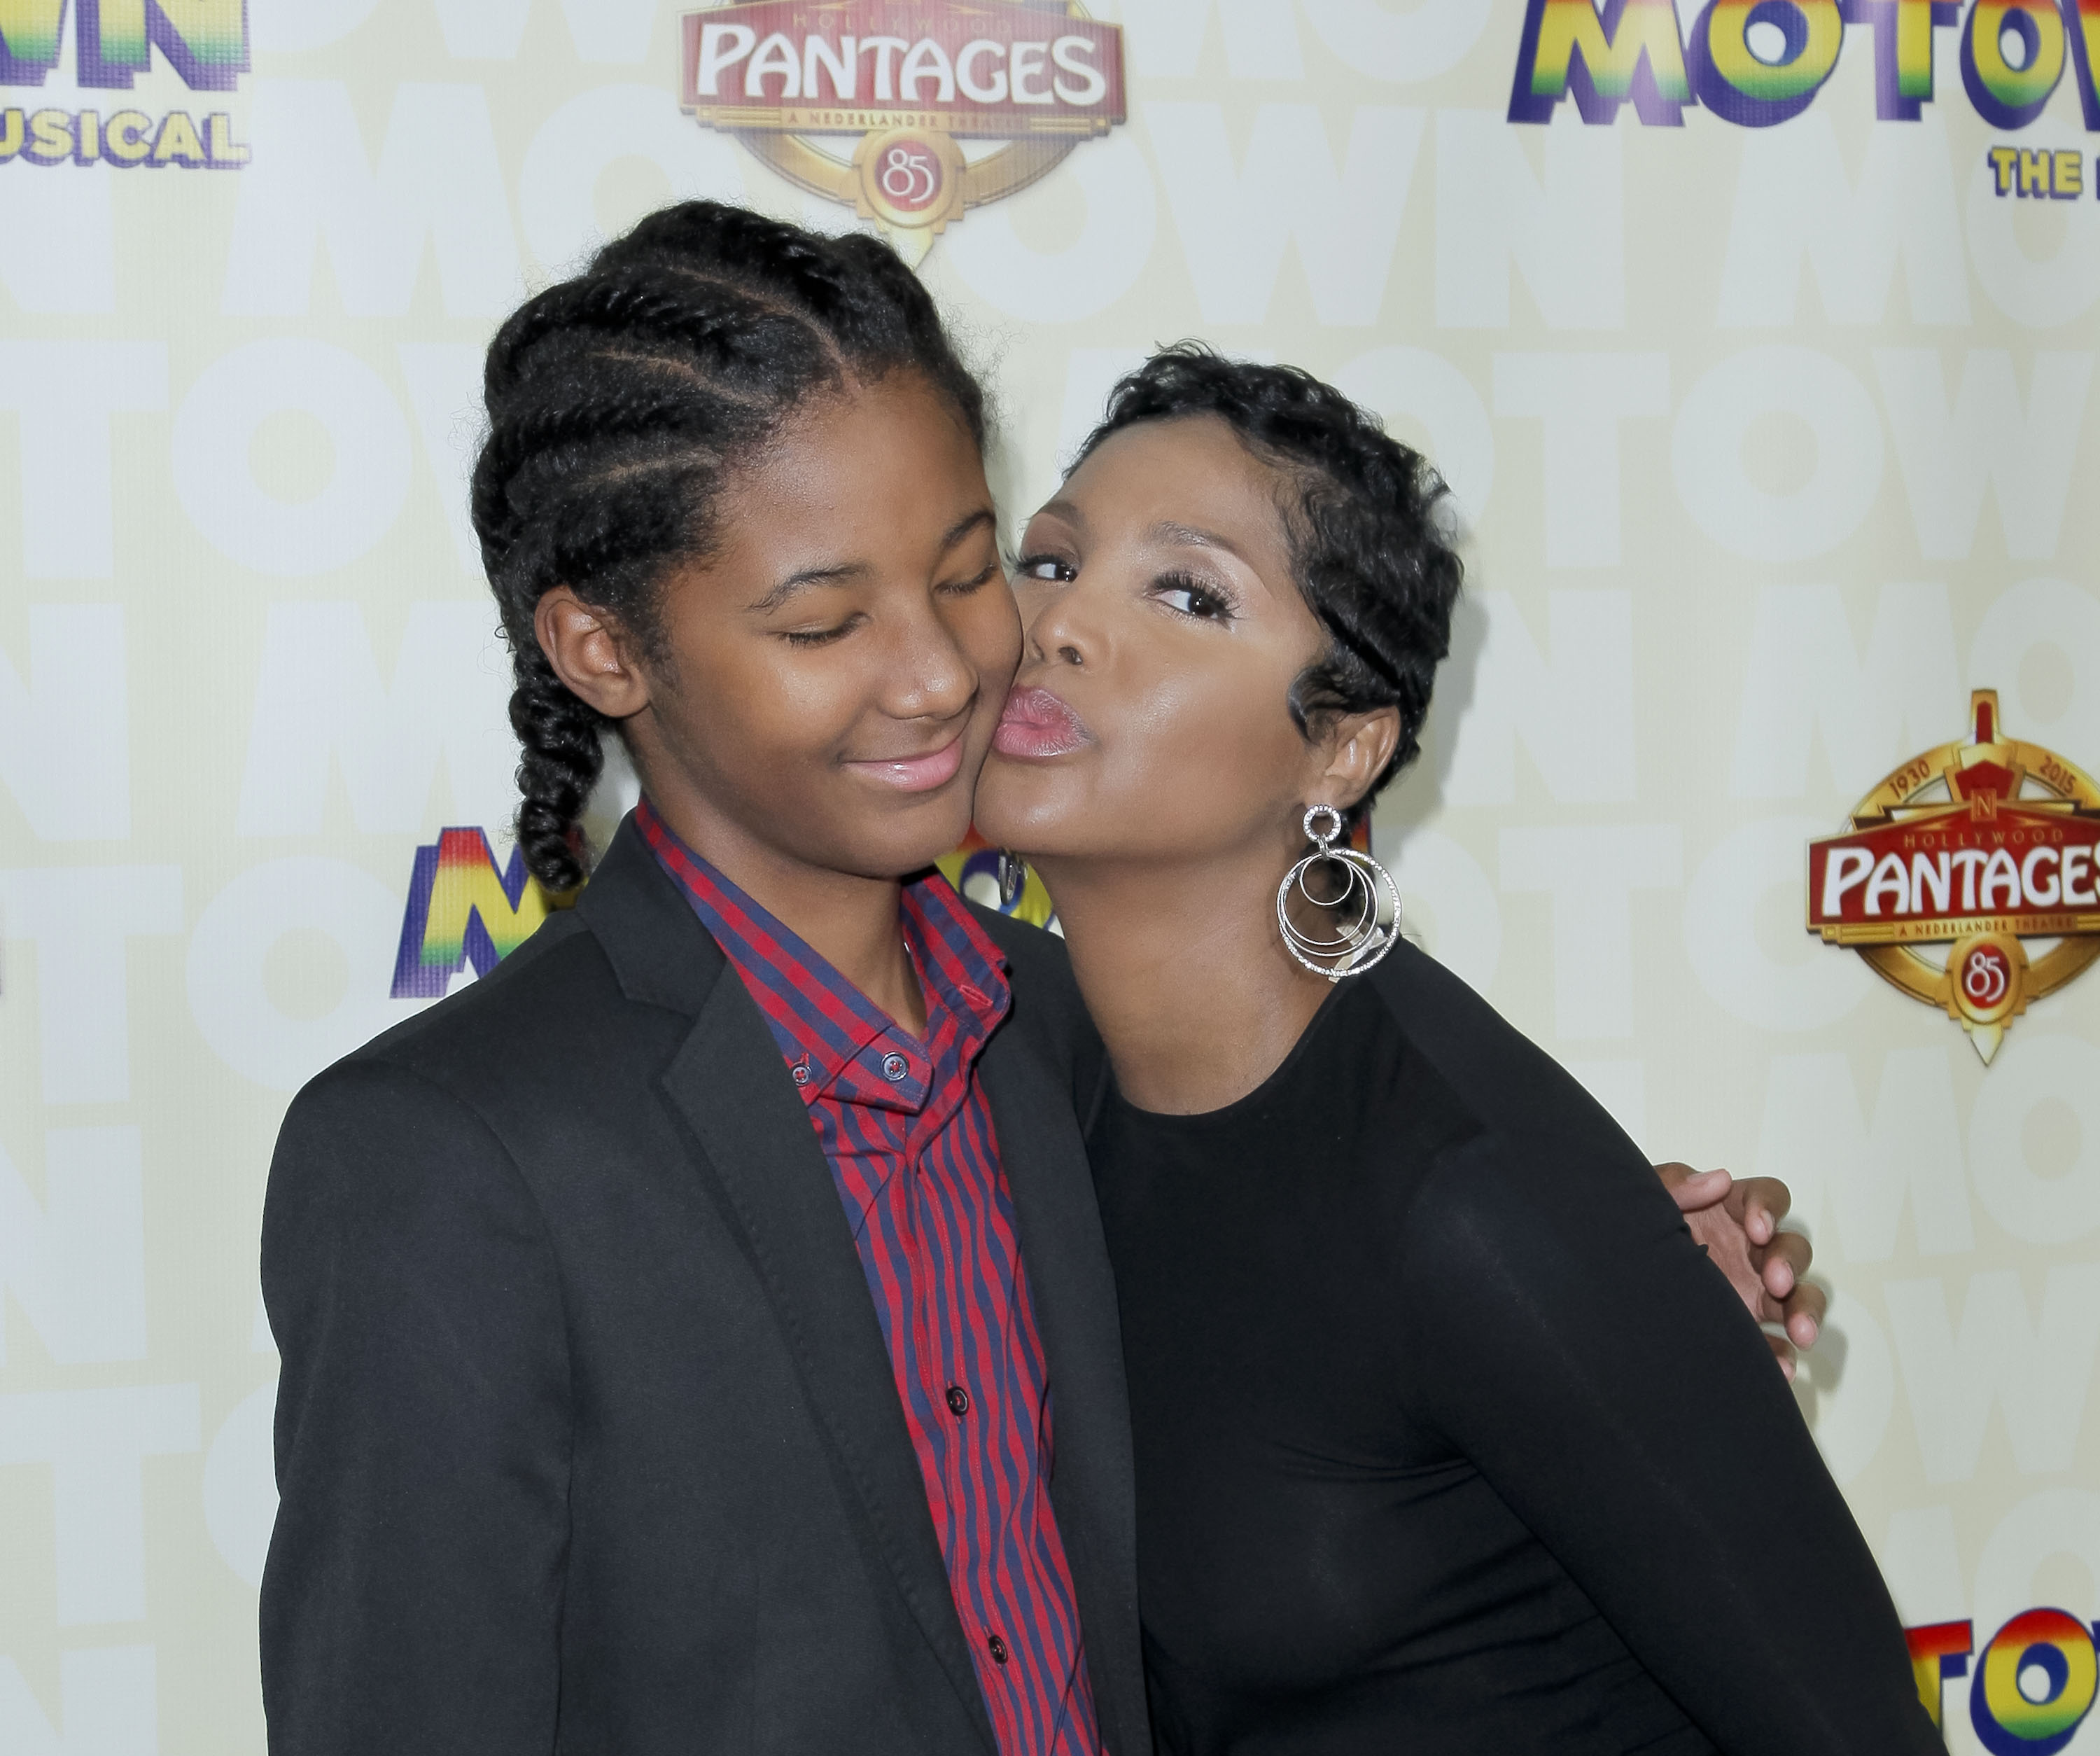 Diezel Ky Braxton-Lewis and Toni Braxton attend the opeing night of "Motown: The Musical" at the Pantages Theatre, on April 30, 2015, in Hollywood, California. | Source: Getty Images